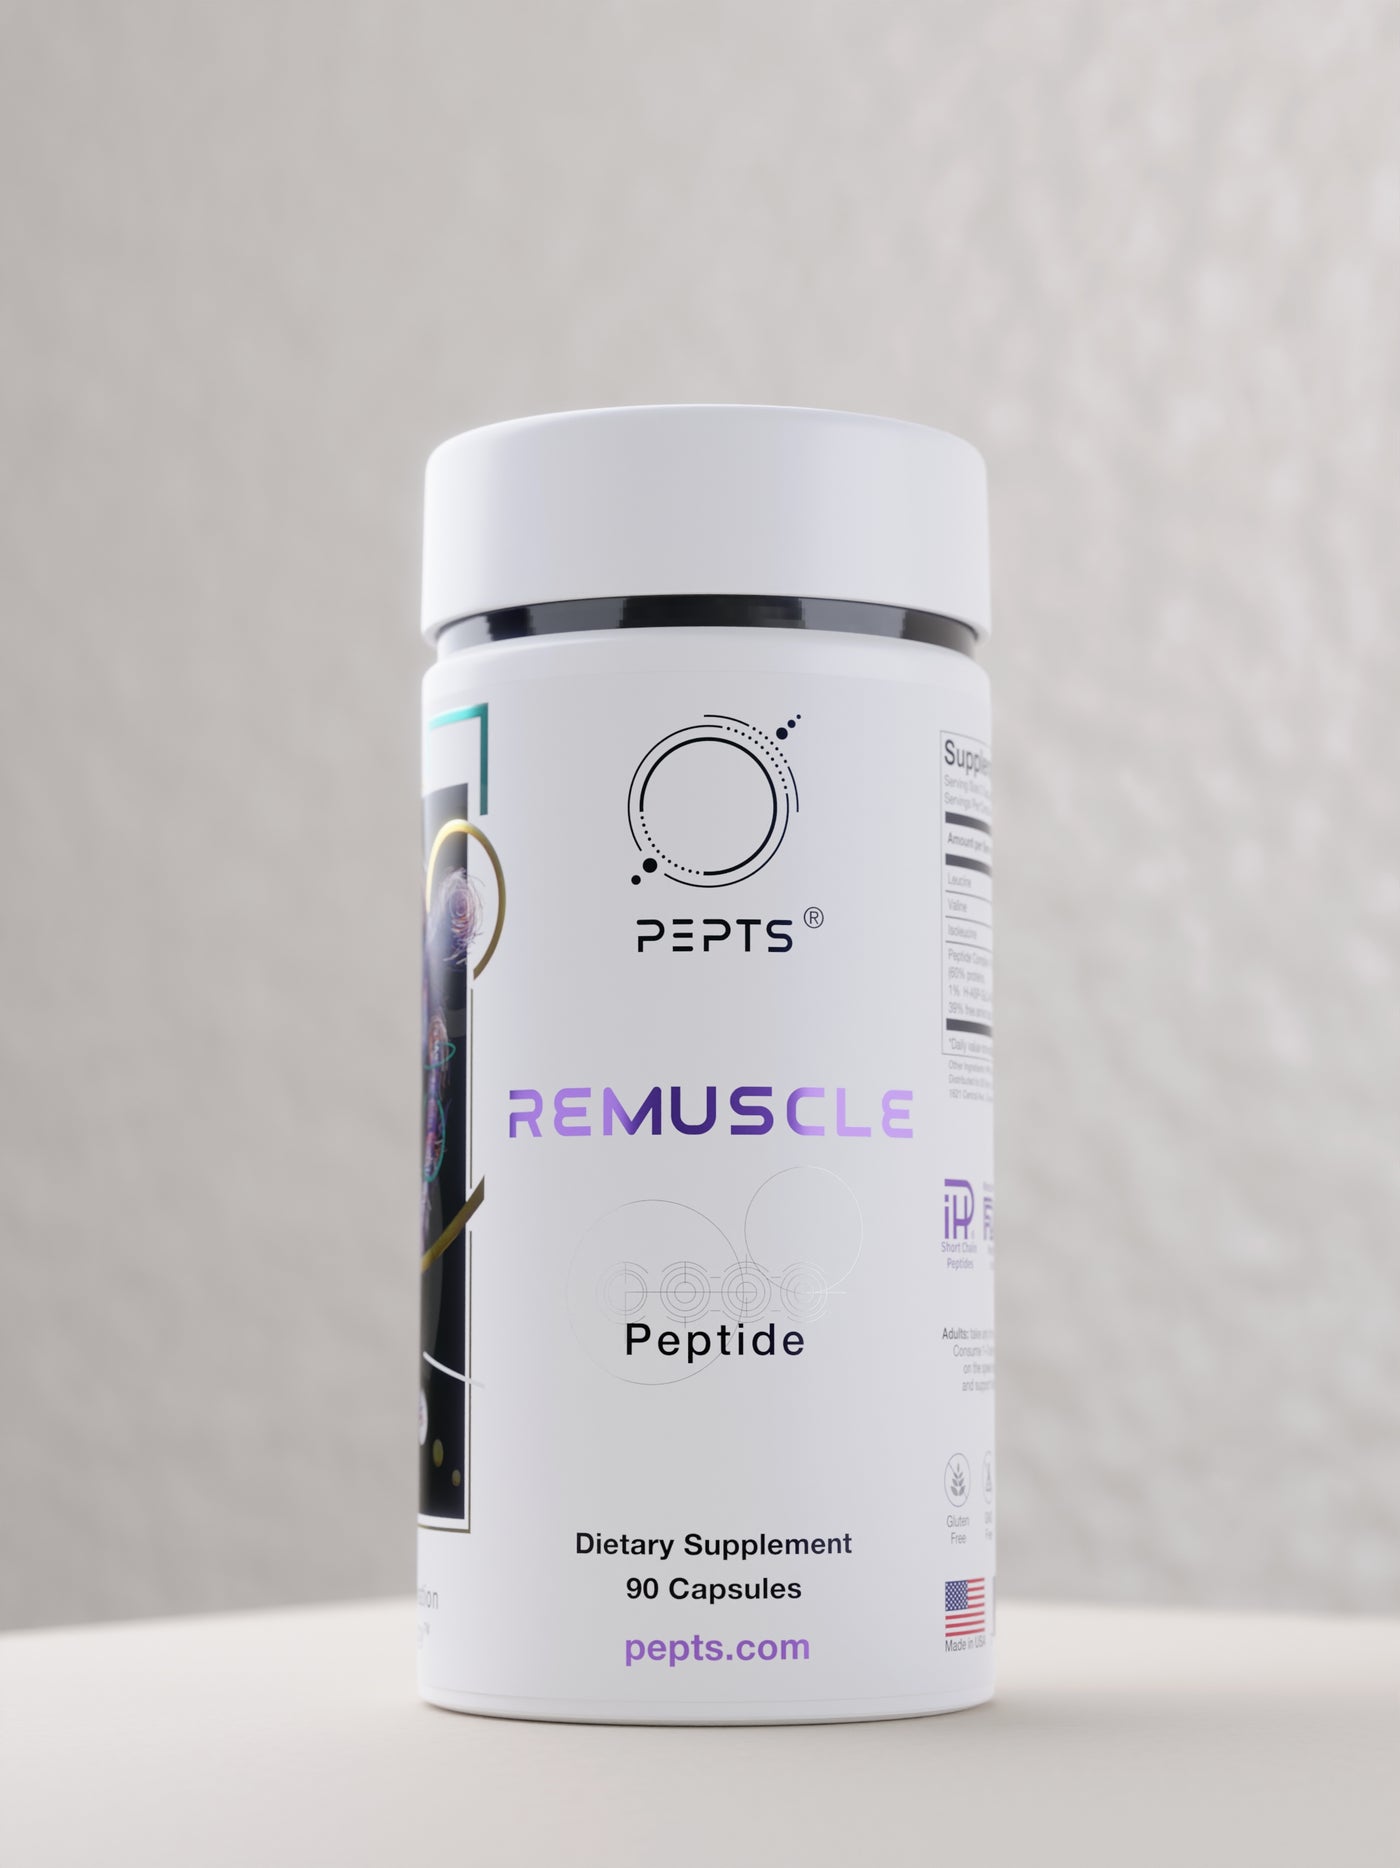 Pepts ReMuscle